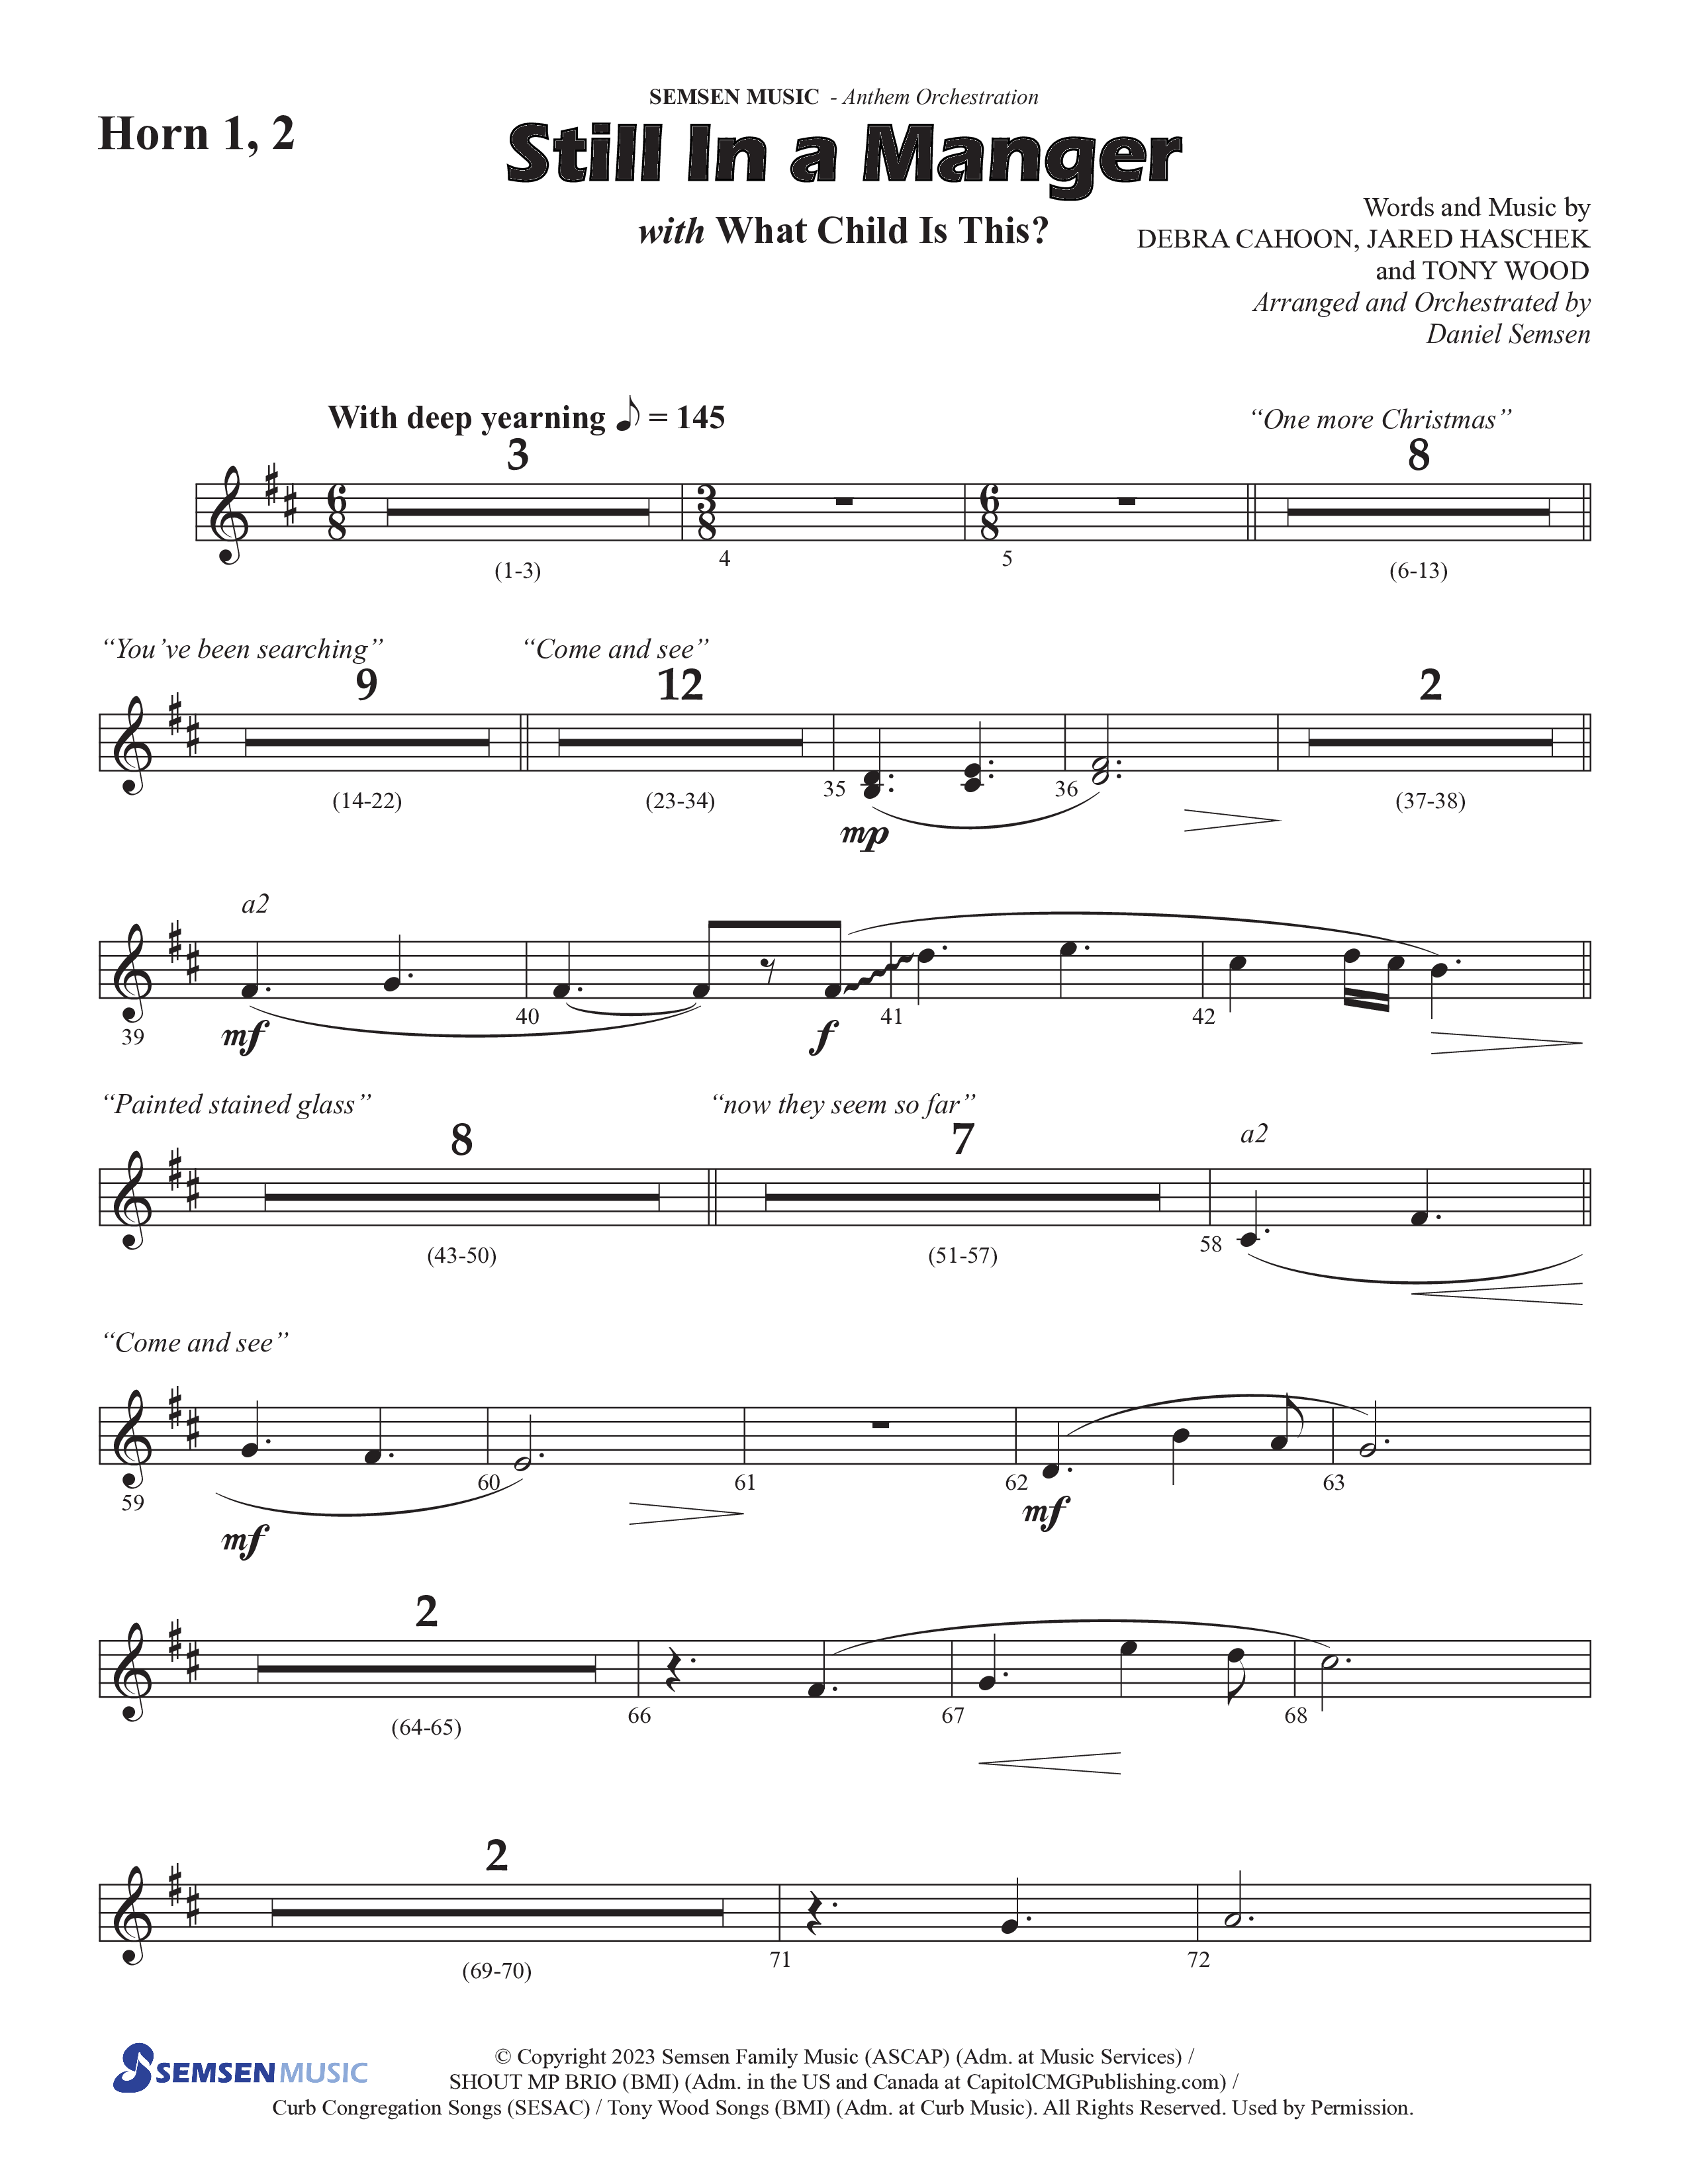 Still In A Manger with What Child Is This (Choral Anthem SATB) French Horn 1/2 (Semsen Music / Arr. Daniel Semsen)